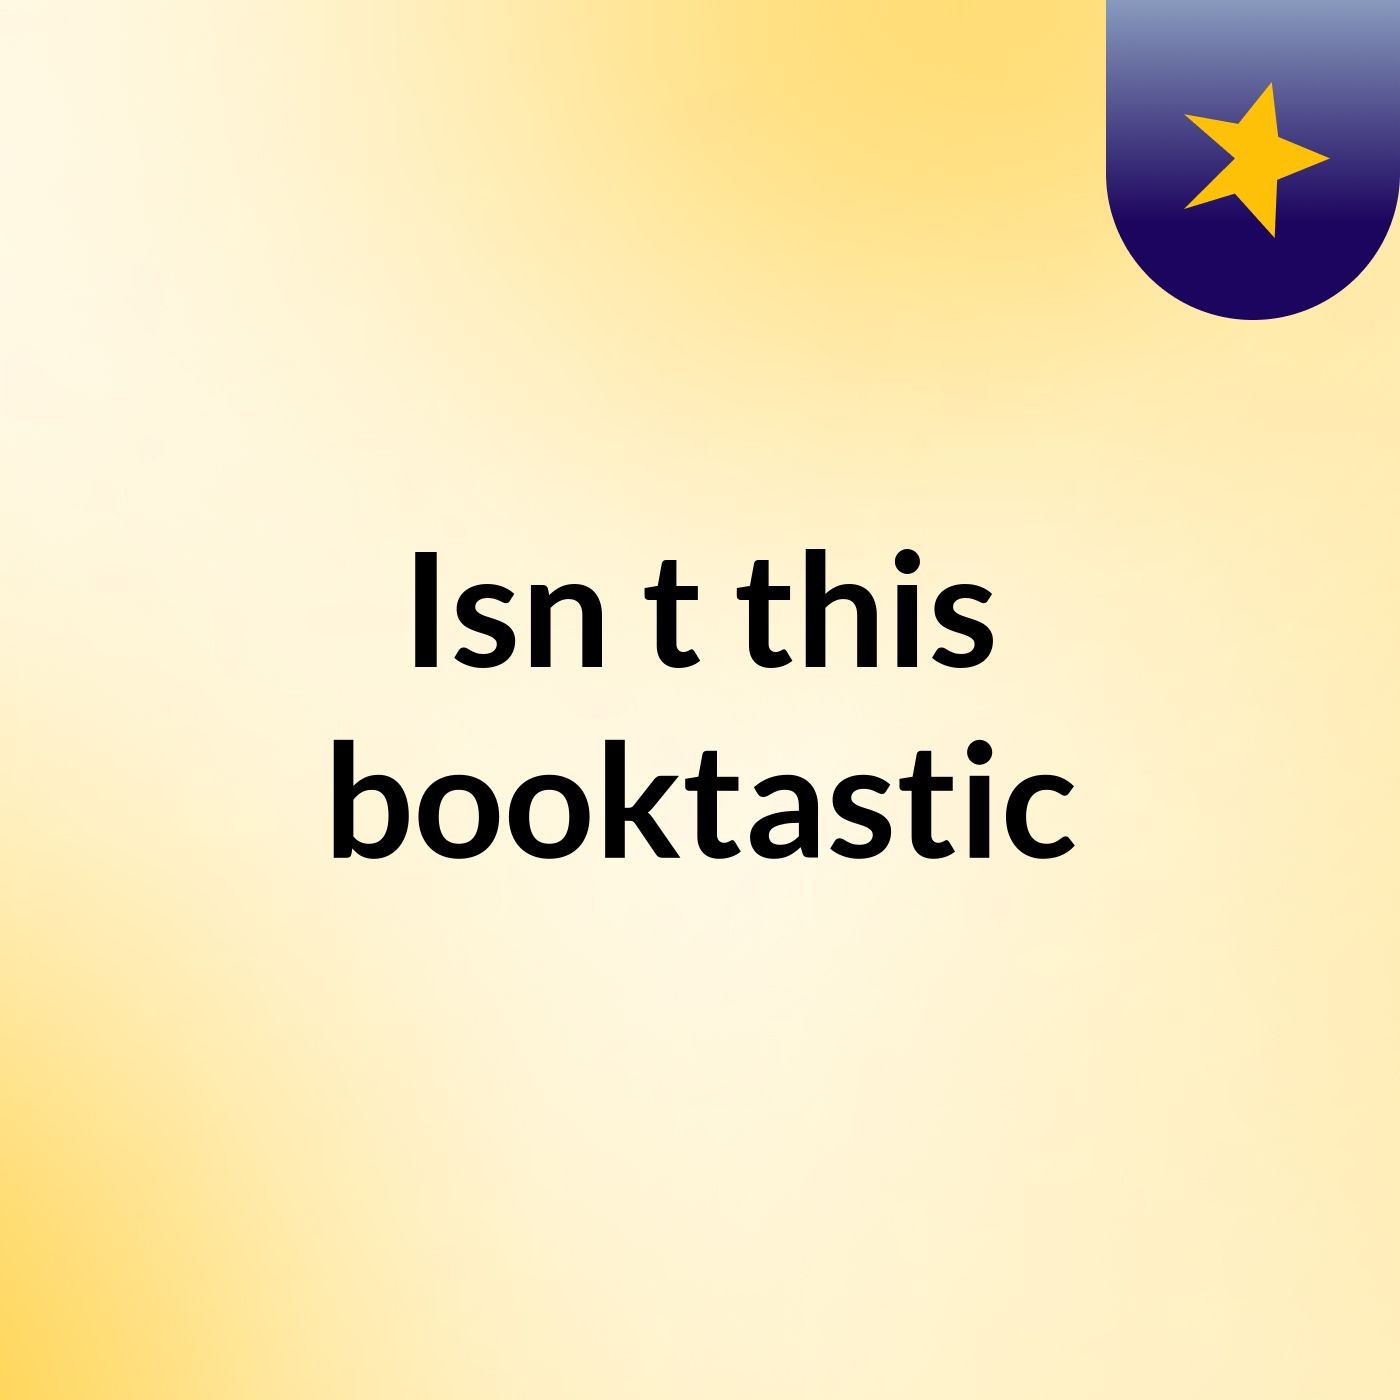 Isn't this booktastic